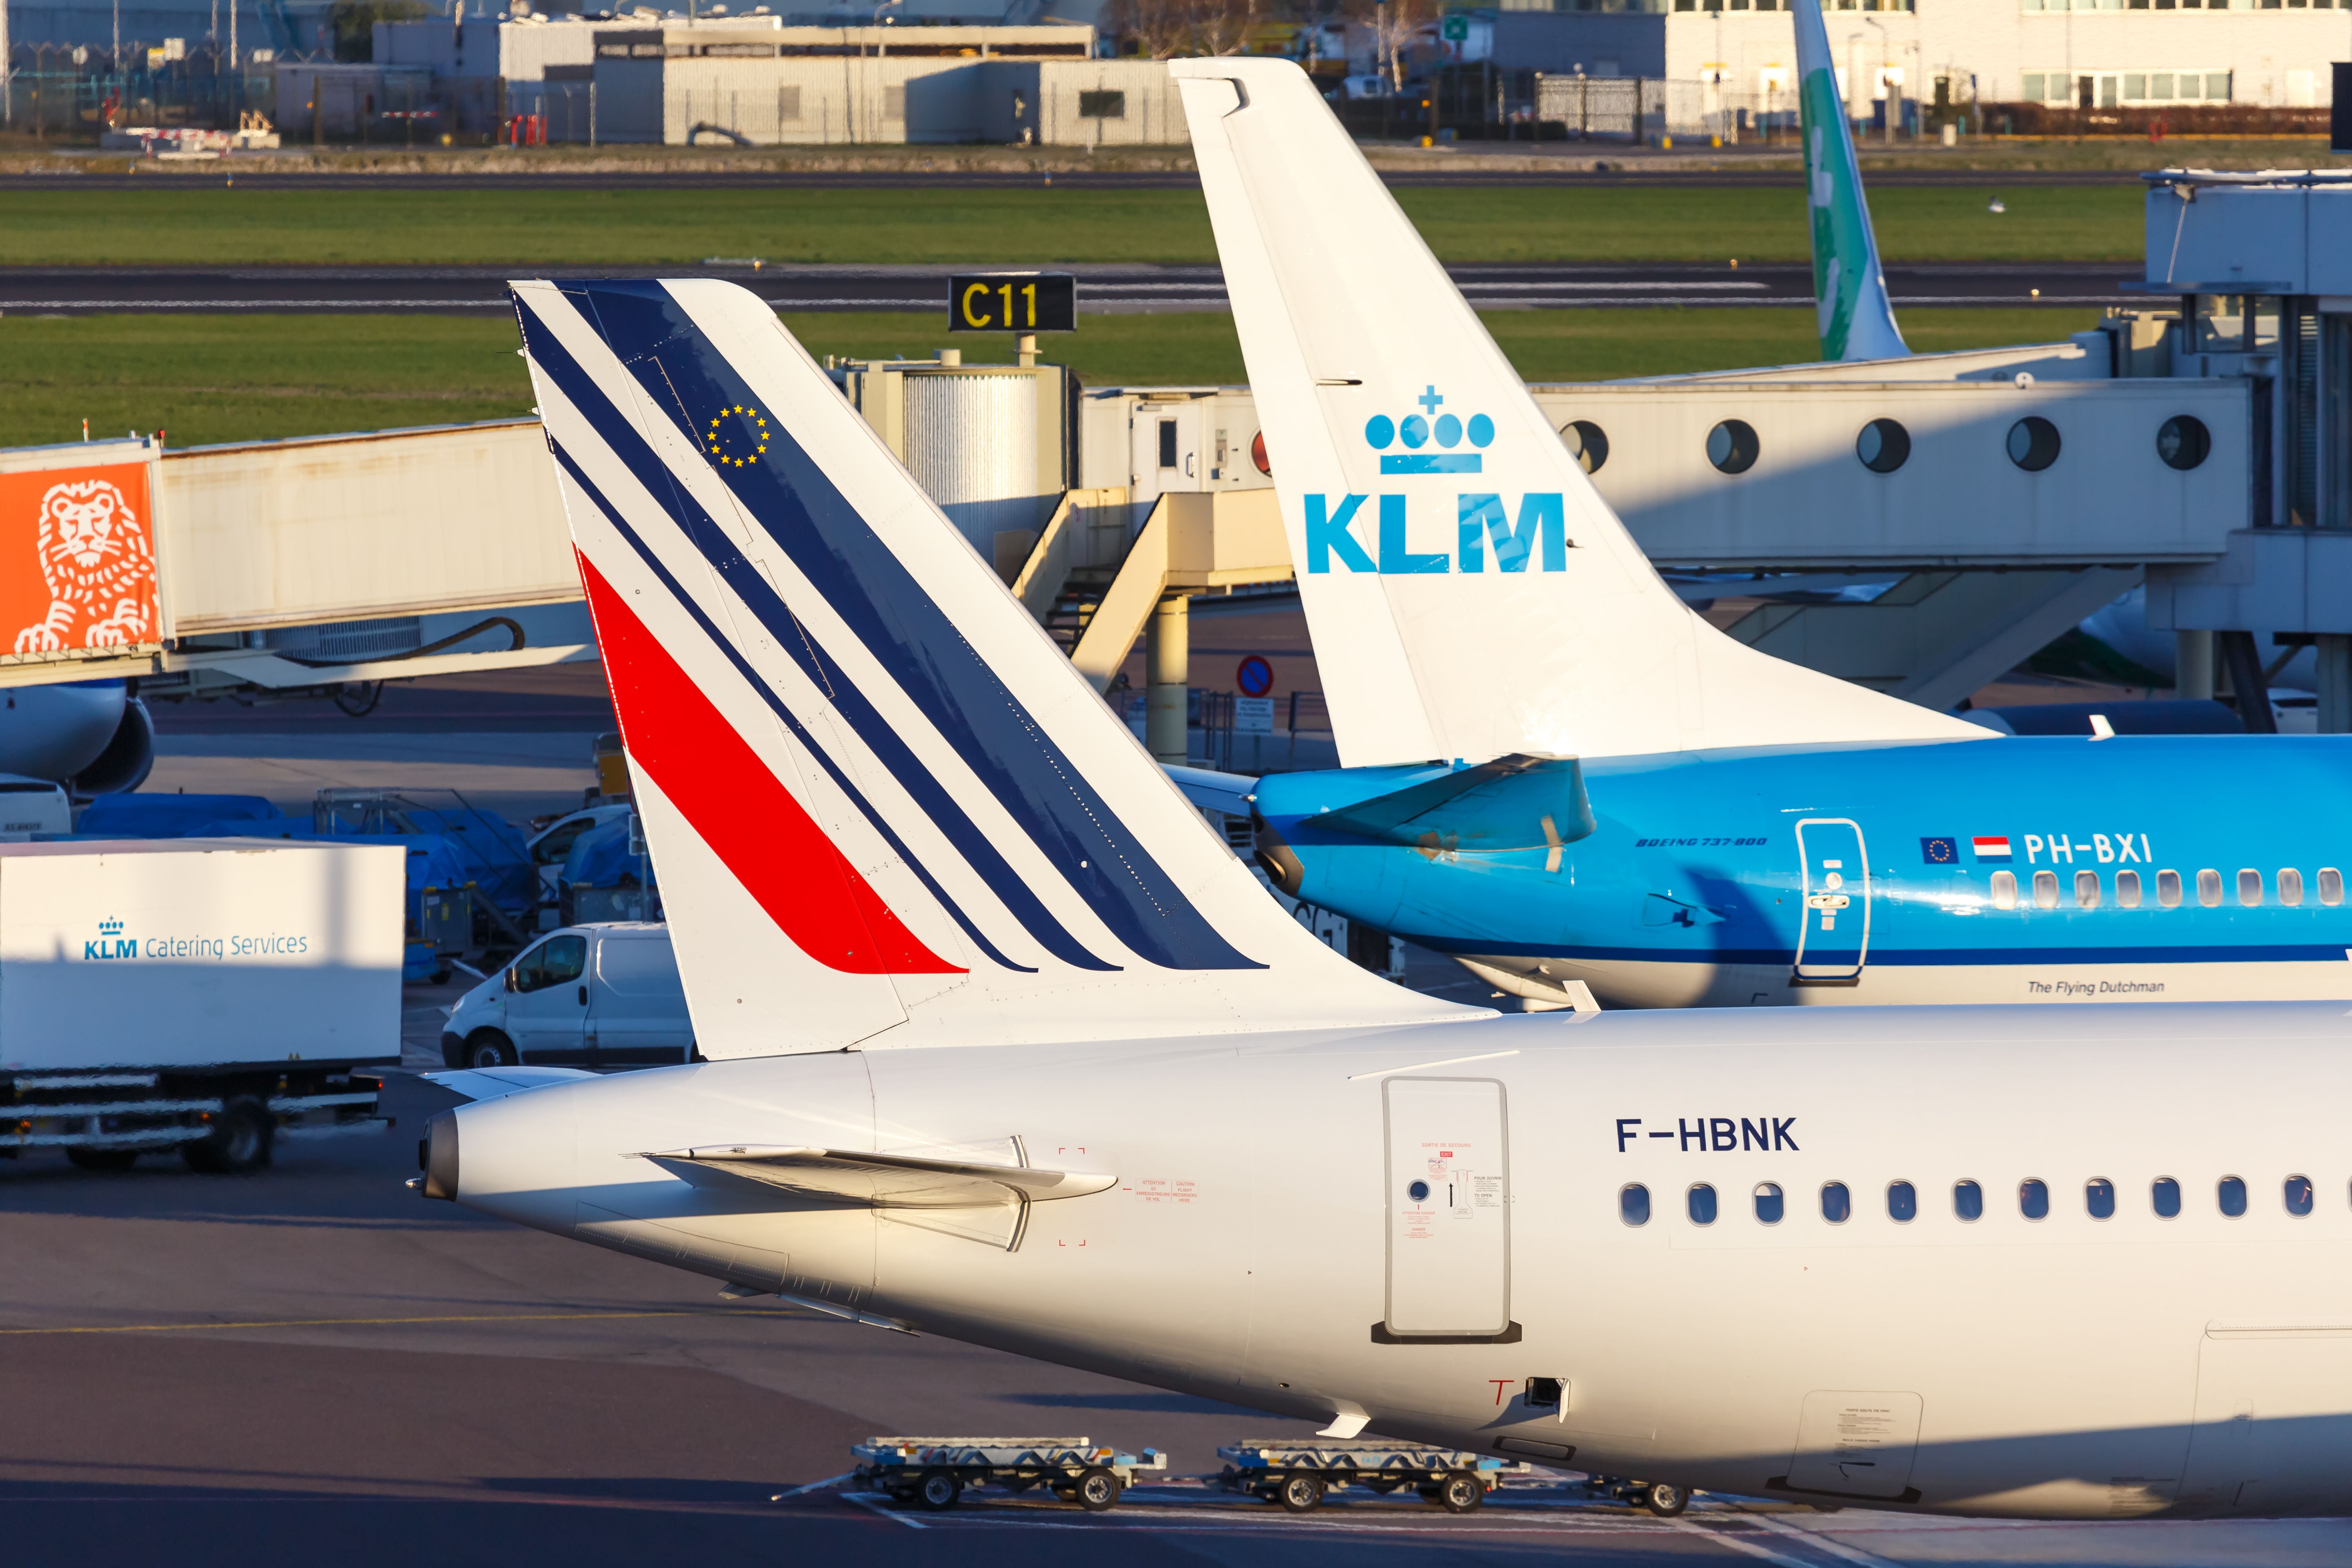 Air France and KLM aircraft parked side by side.